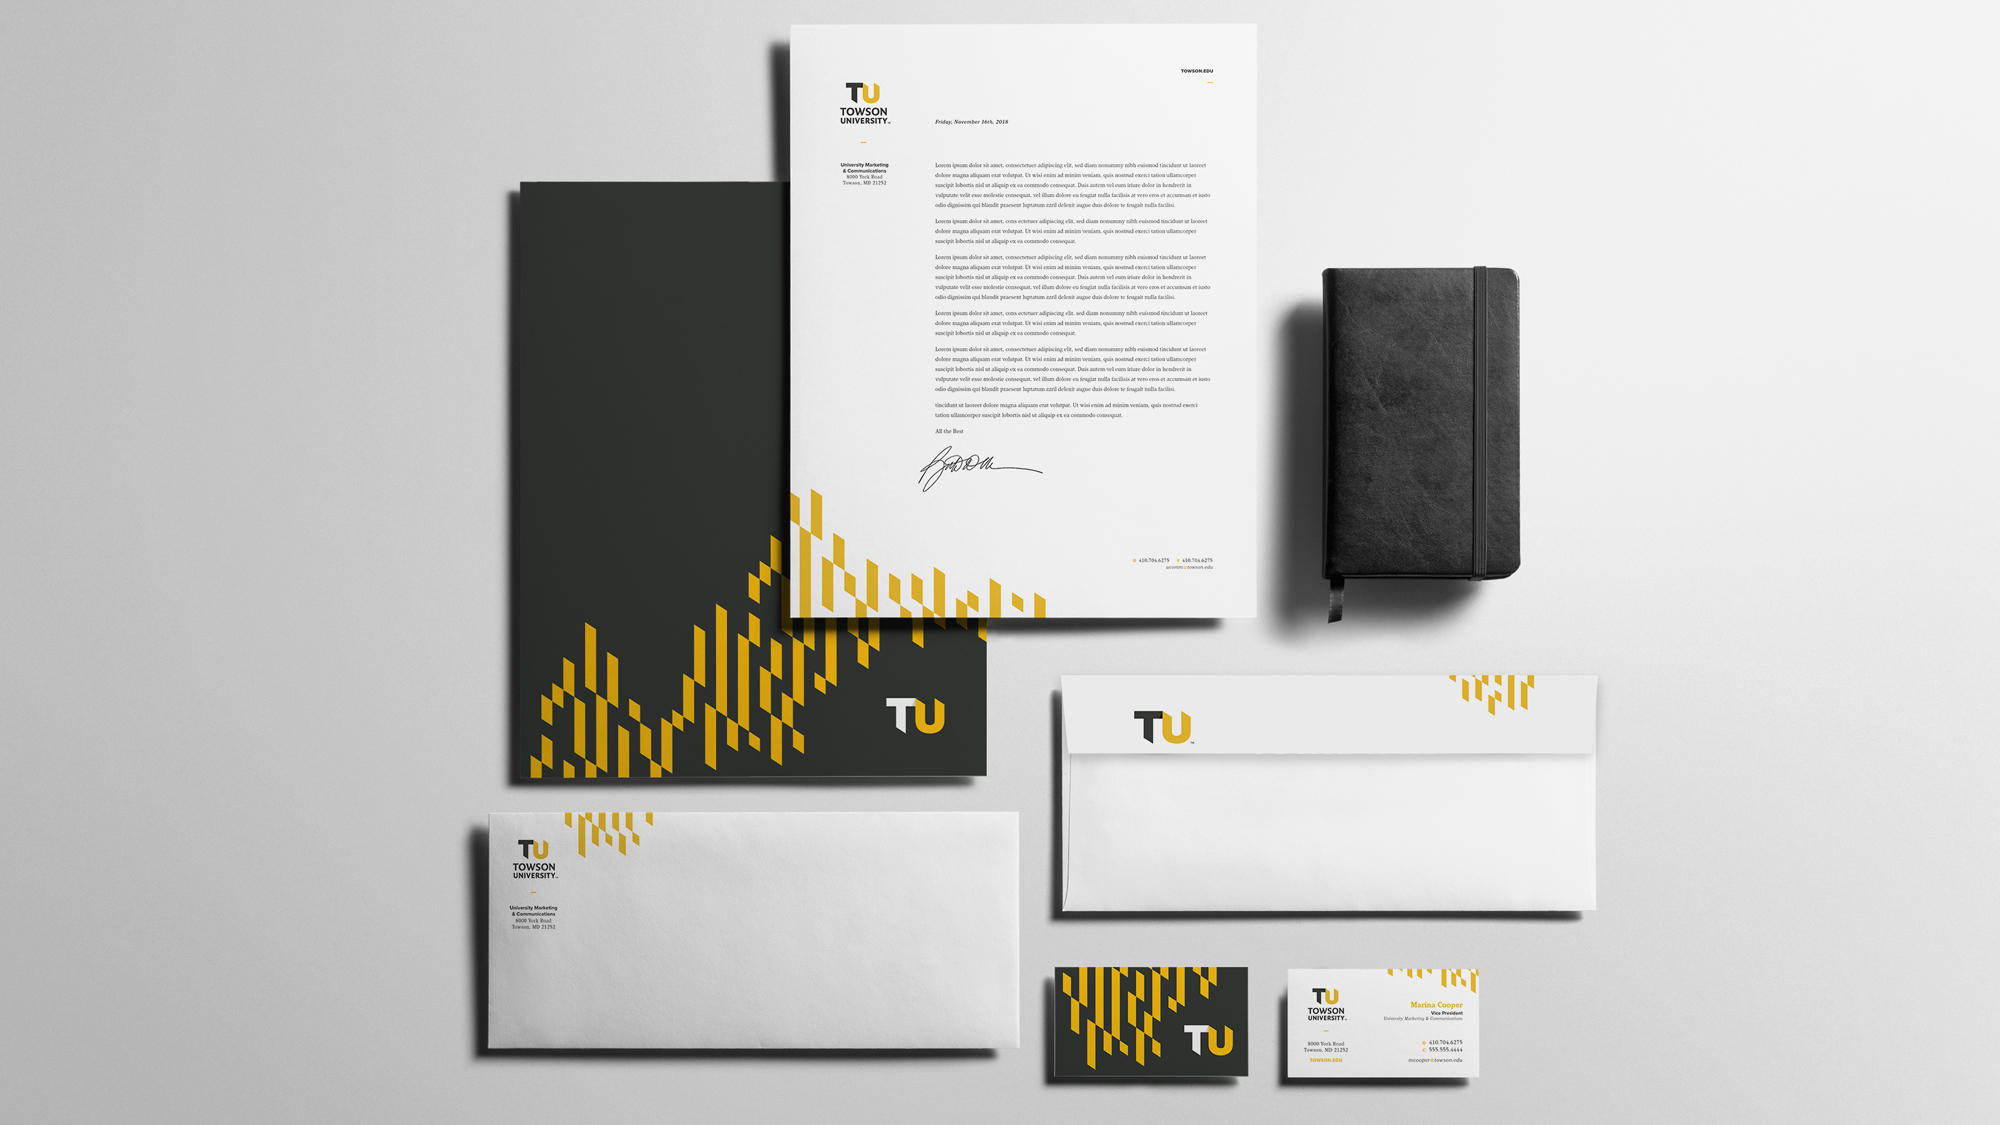 New brand stationary examples